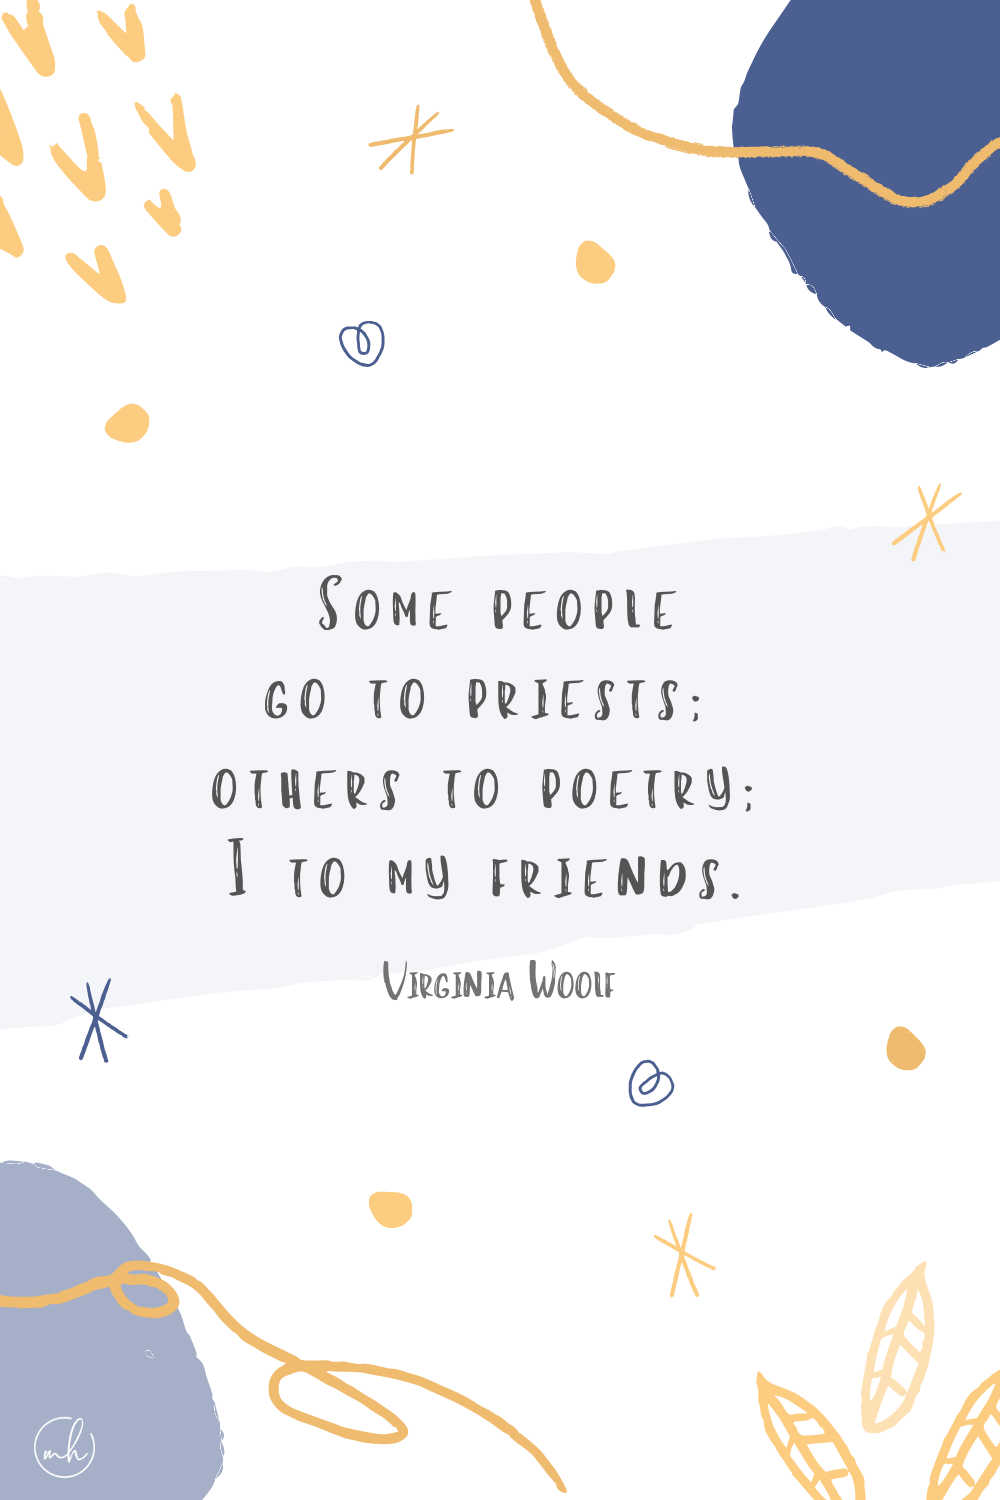 “Some people go to priests; others to poetry; I to my friends.” - Virginia Woolf